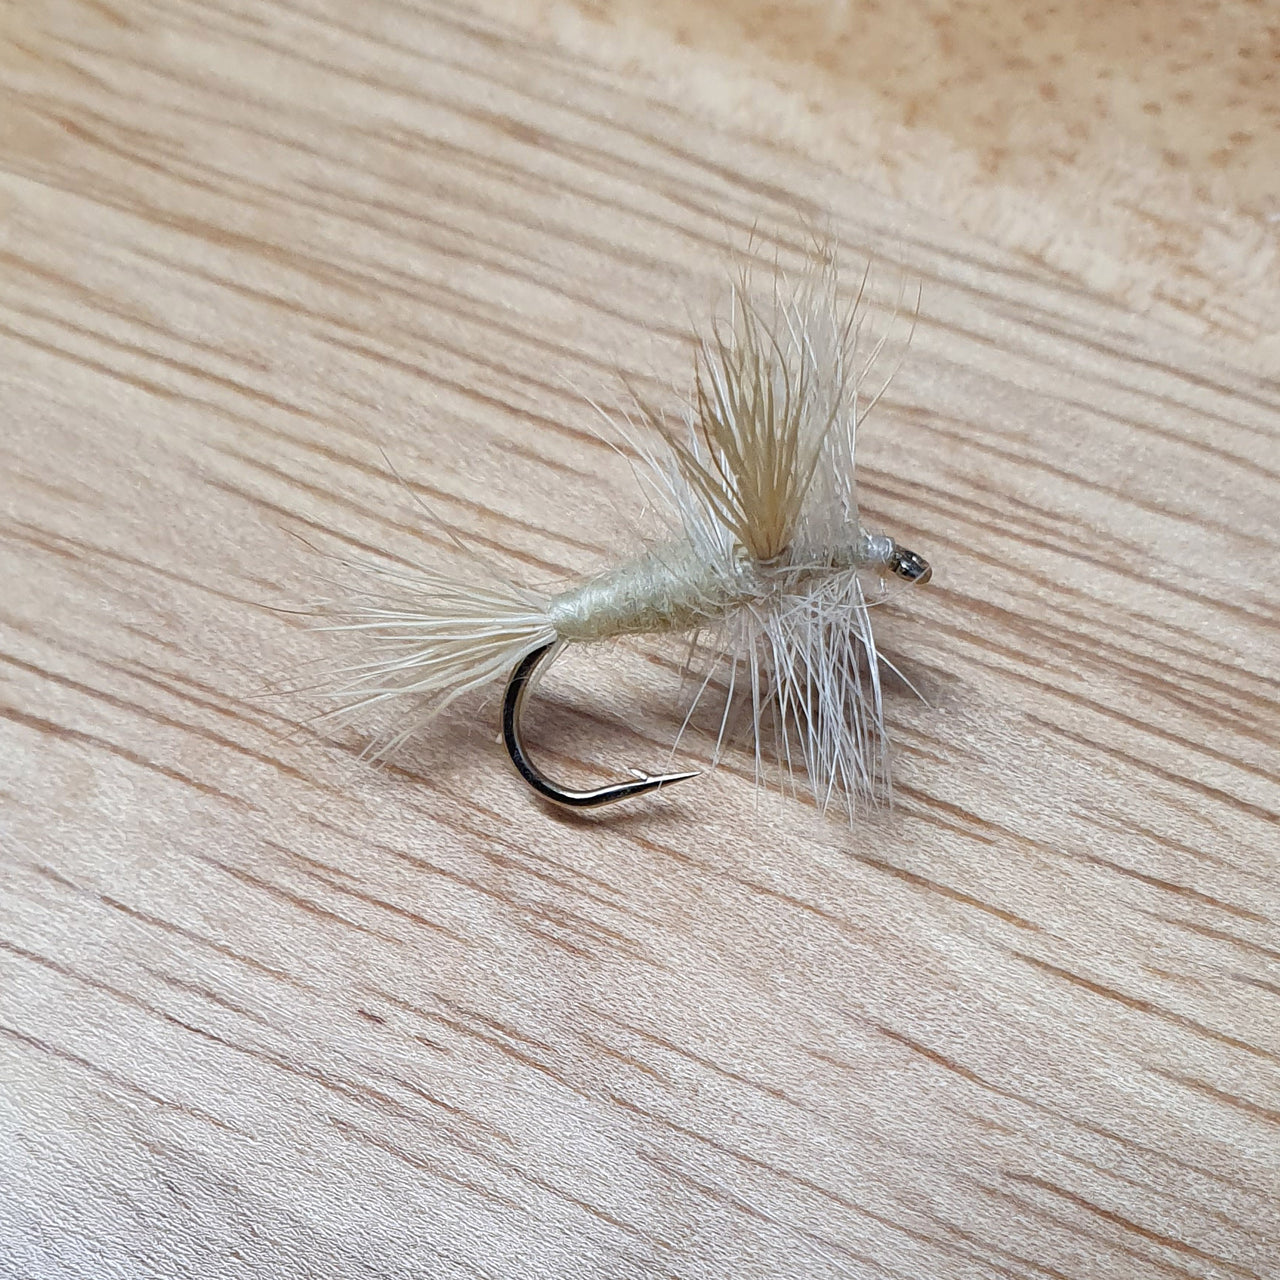 Blonde dry fly